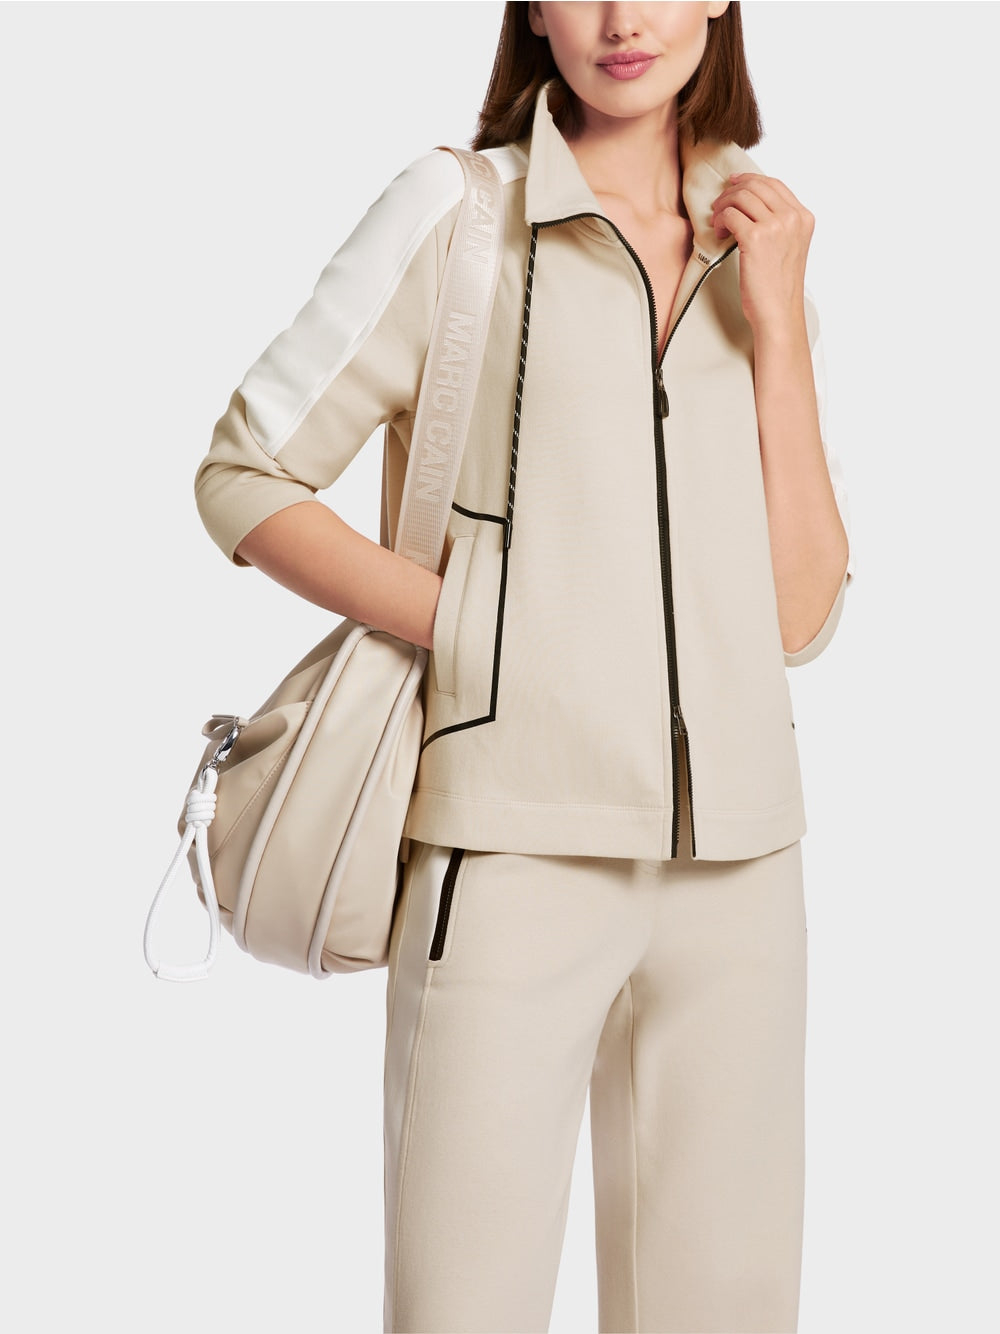 Marc Cain Sporty zip jacket with stand-up collar in Moon Rock